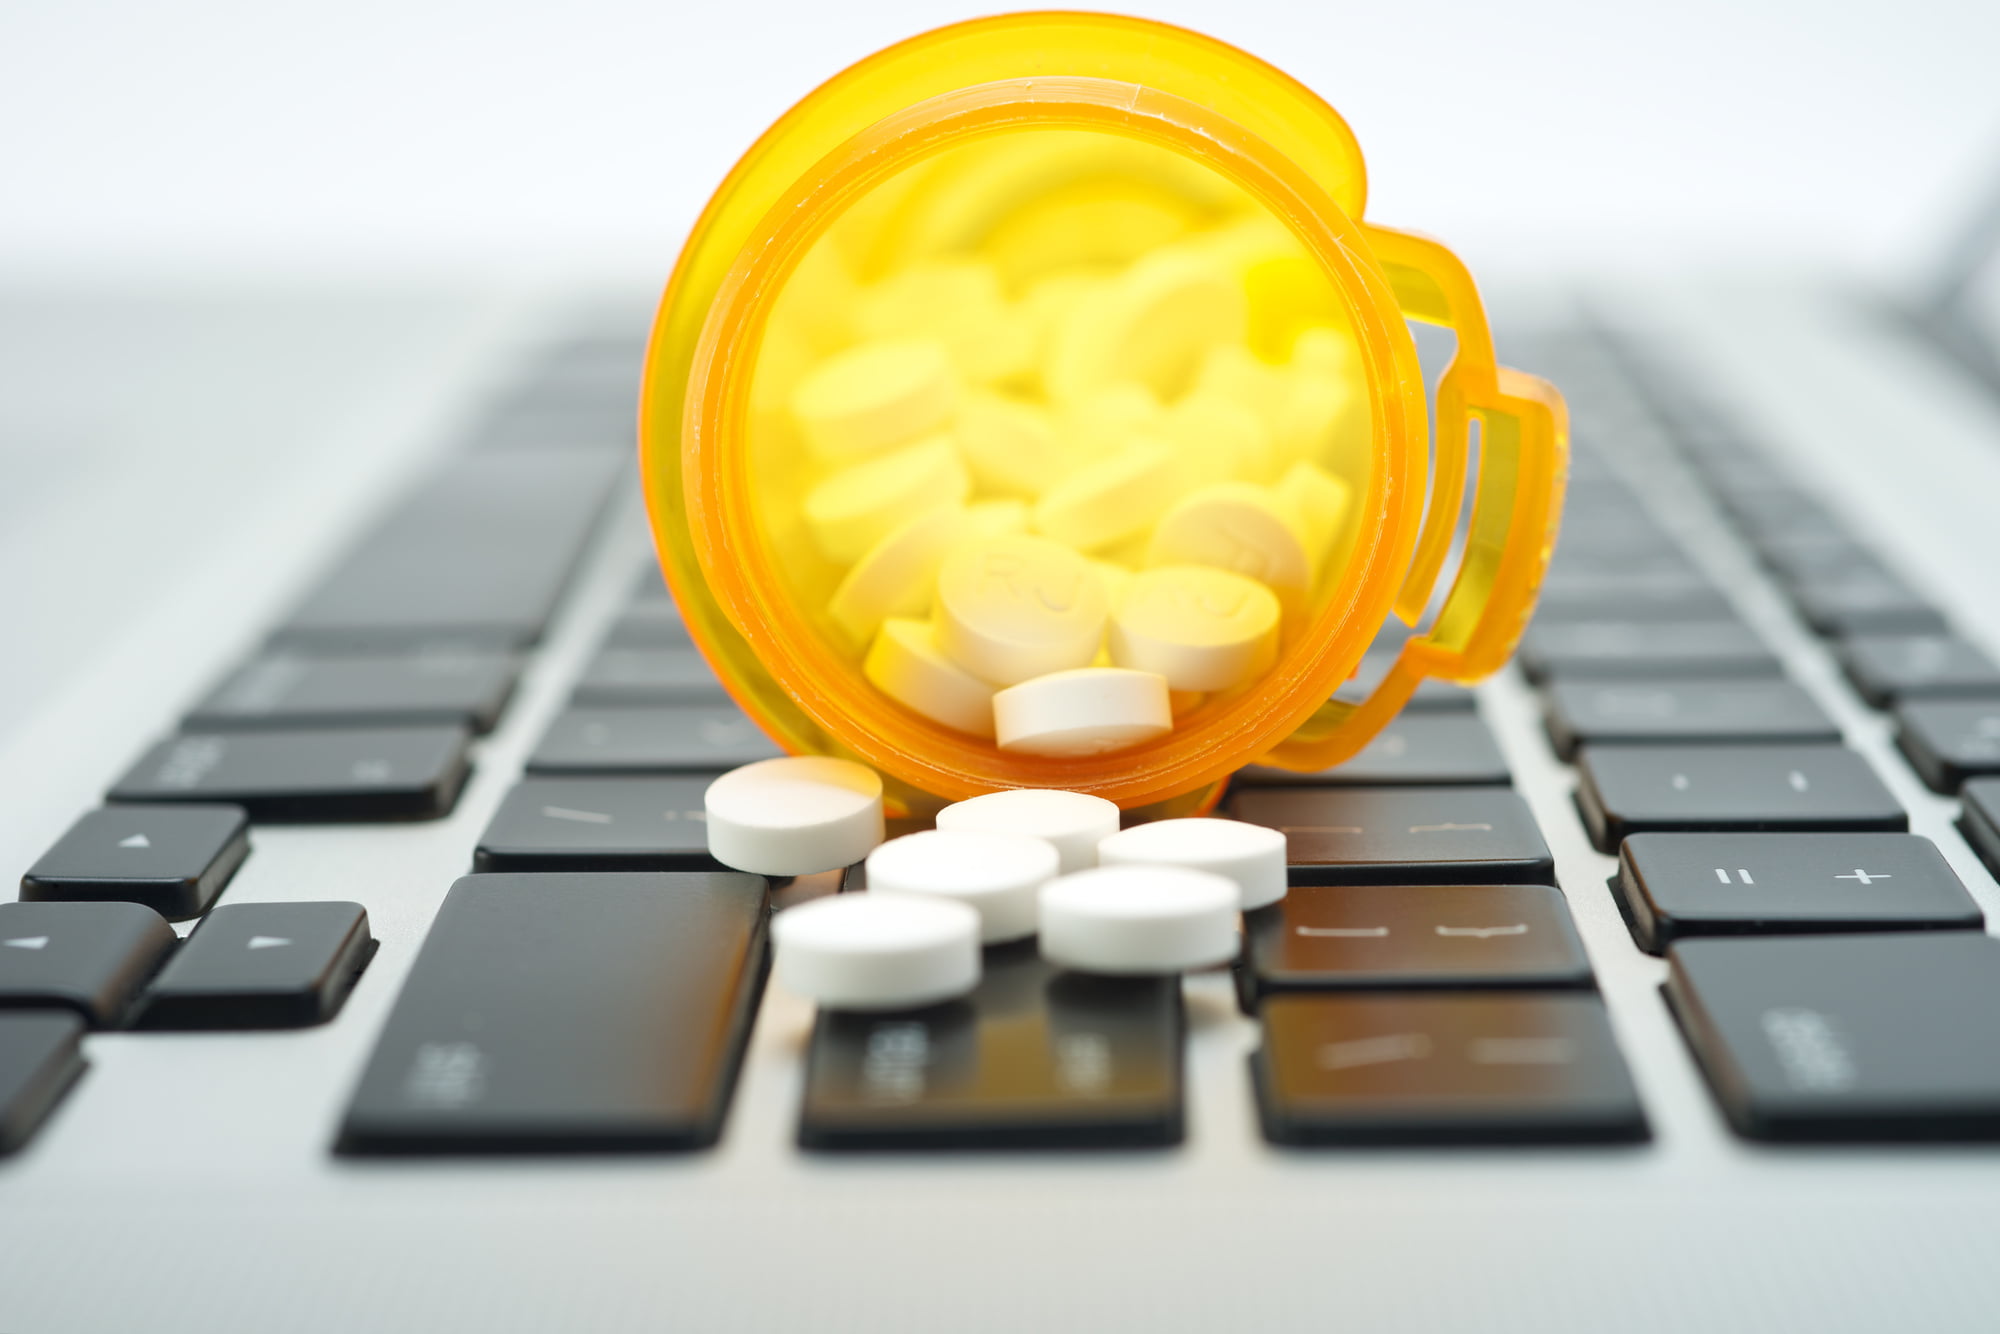 If you're trying to find an online pharmacy for your medication needs, keep reading because we're giving you tips on finding the best online pharmacy for you.